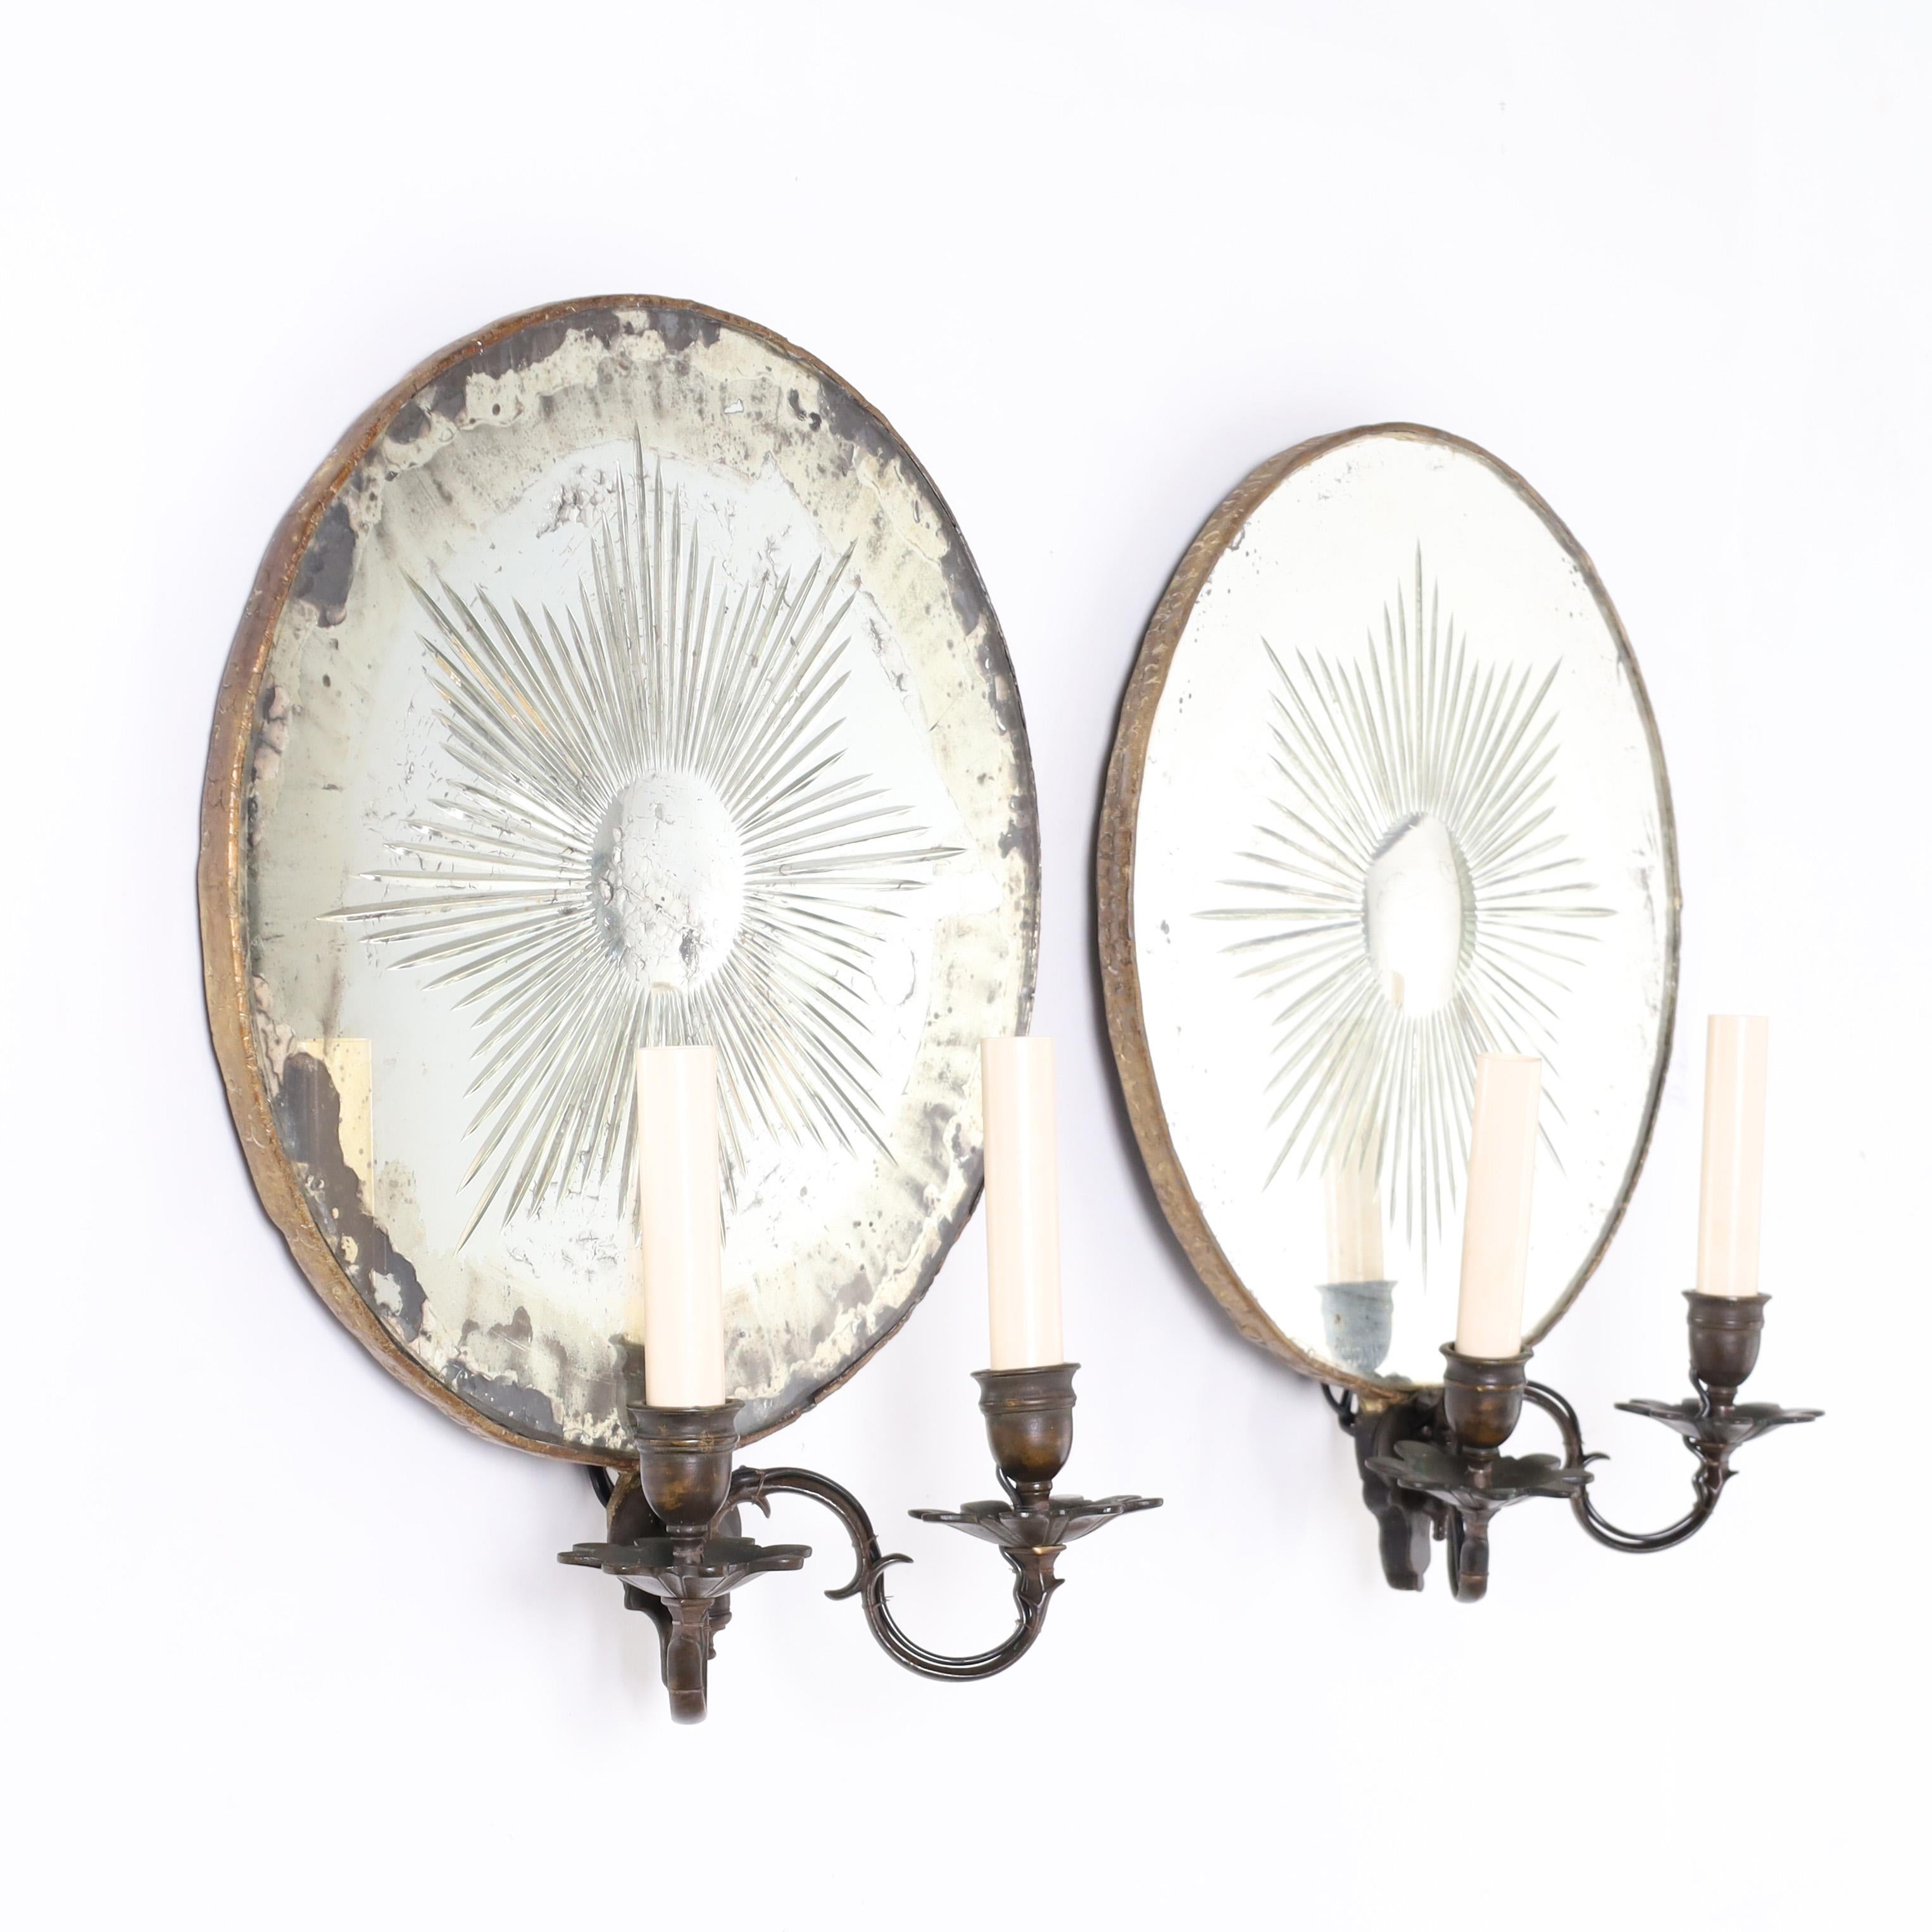 Regency Pair of Antique English Mirrored Wall Sconces